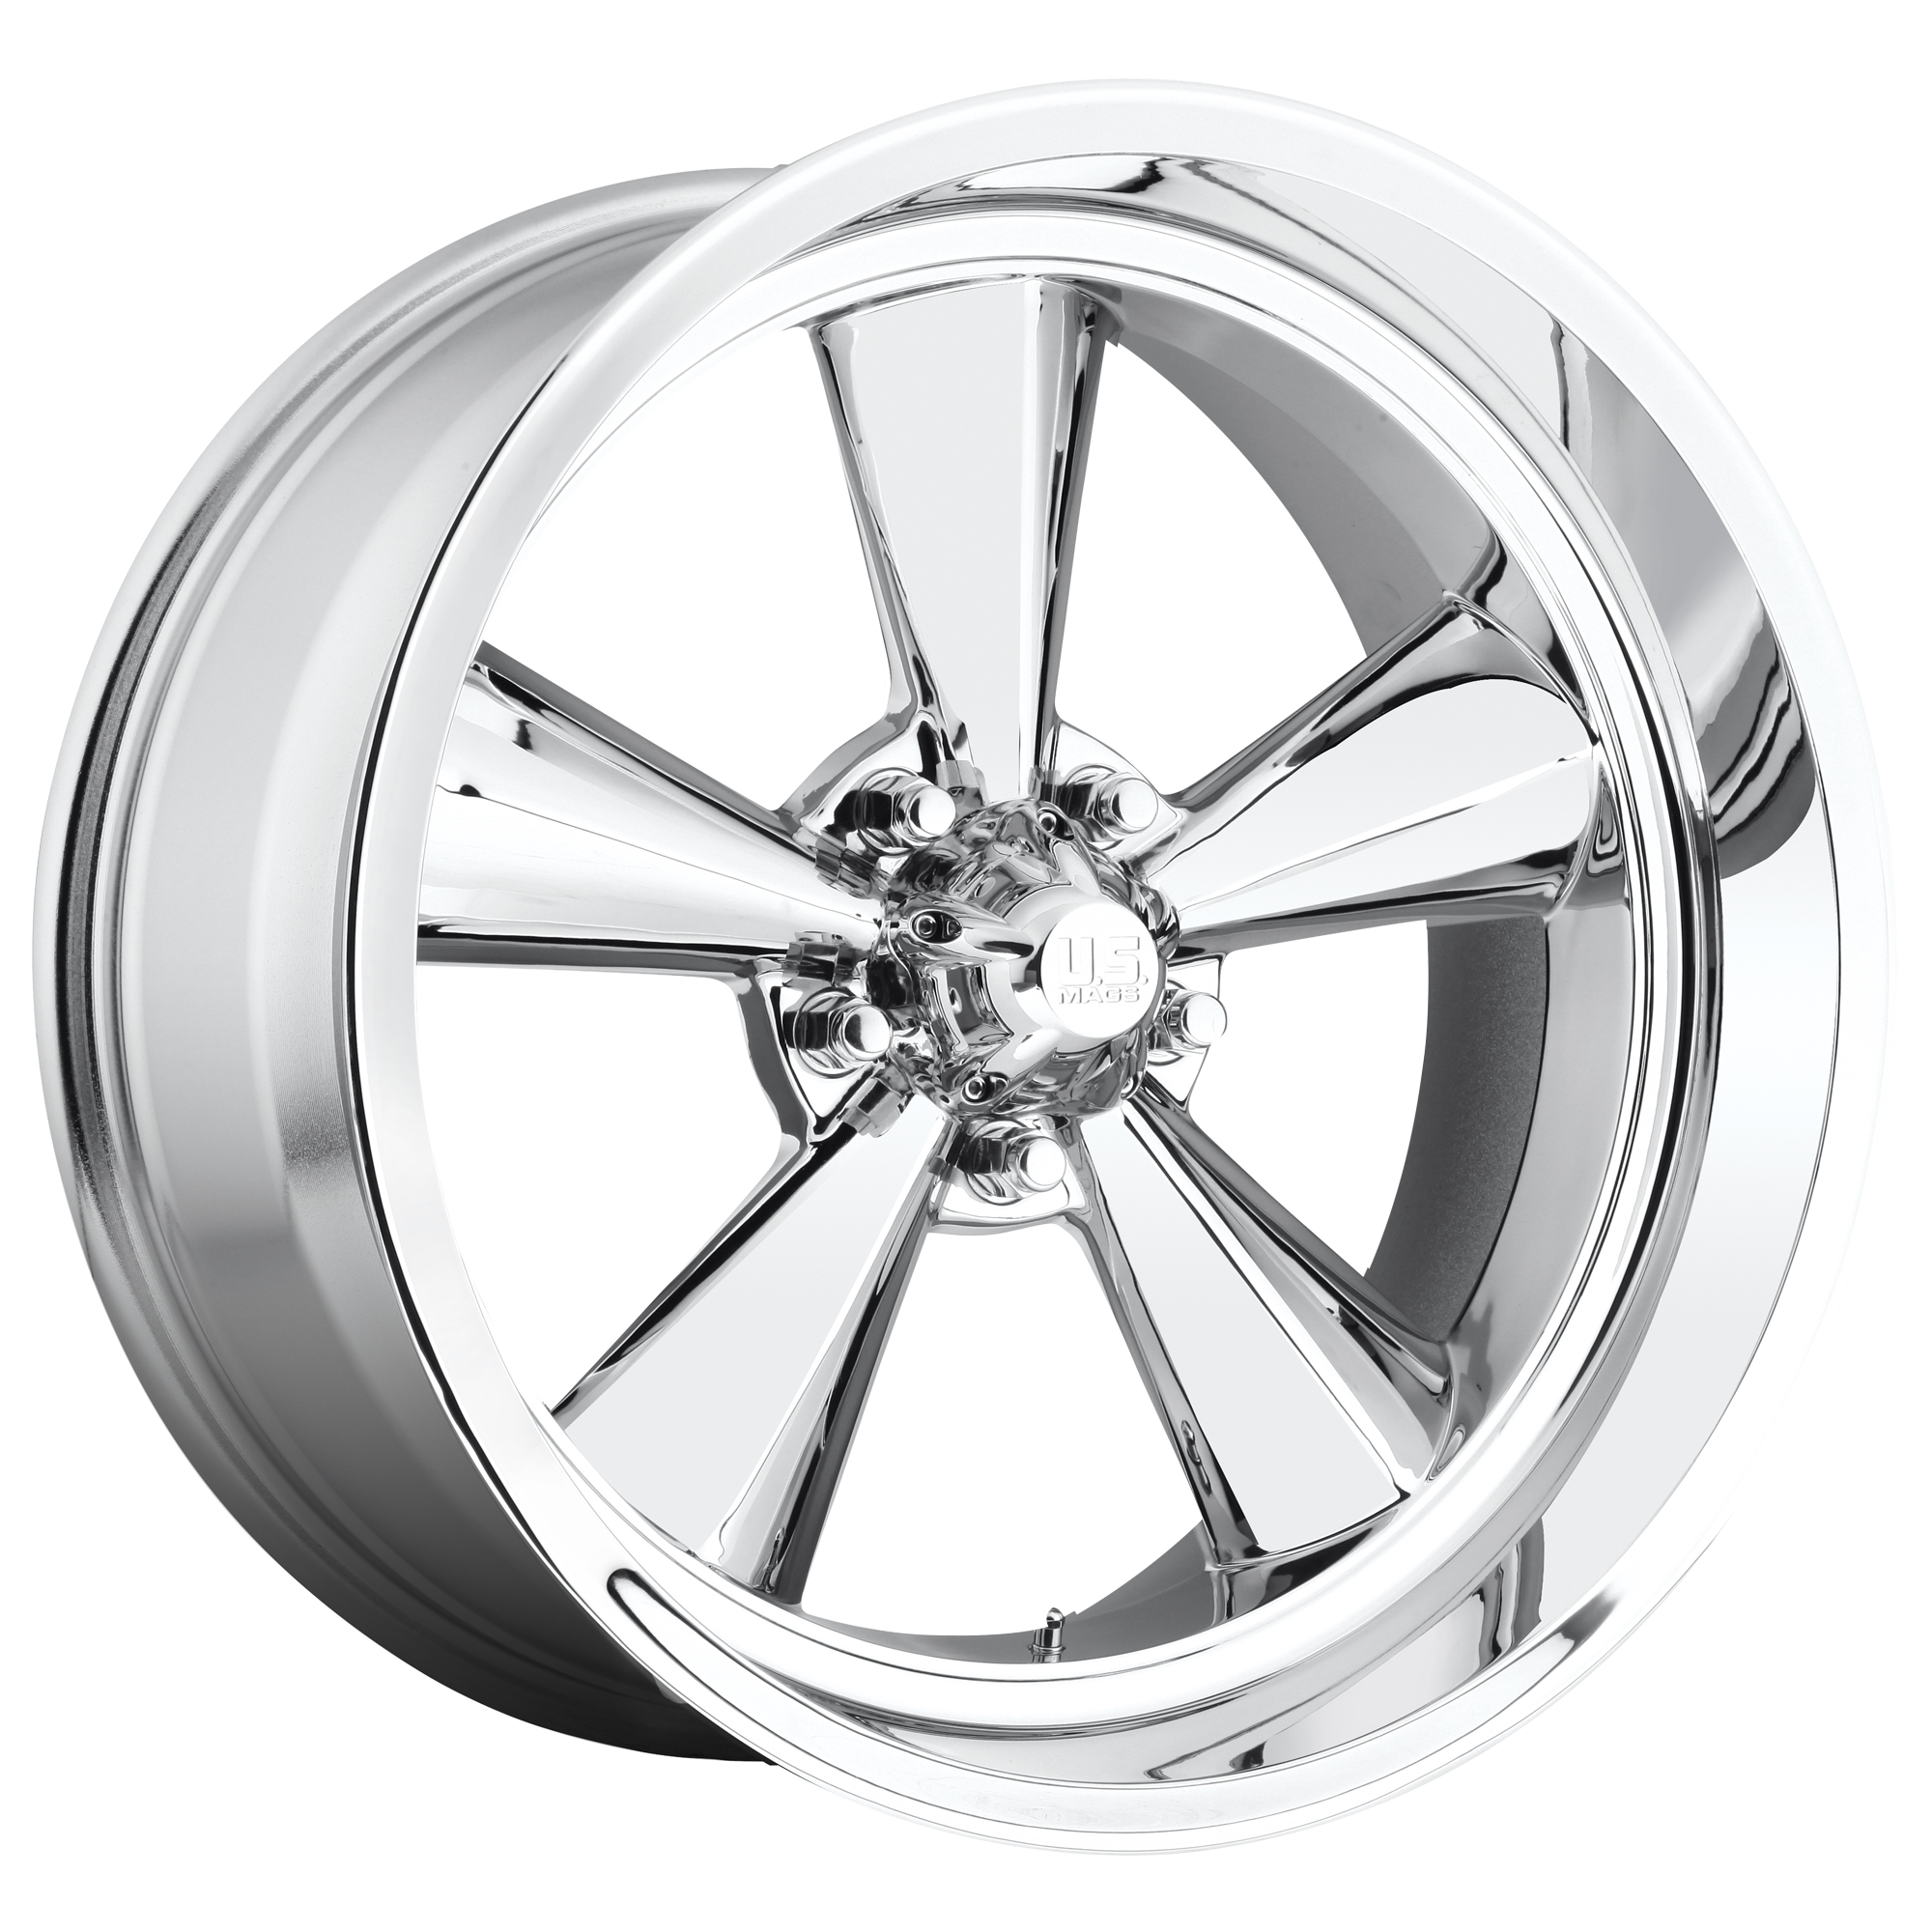 STANDARD 17x8 5x120.65 CHROME PLATED (1 mm) - Tires and Engine Performance